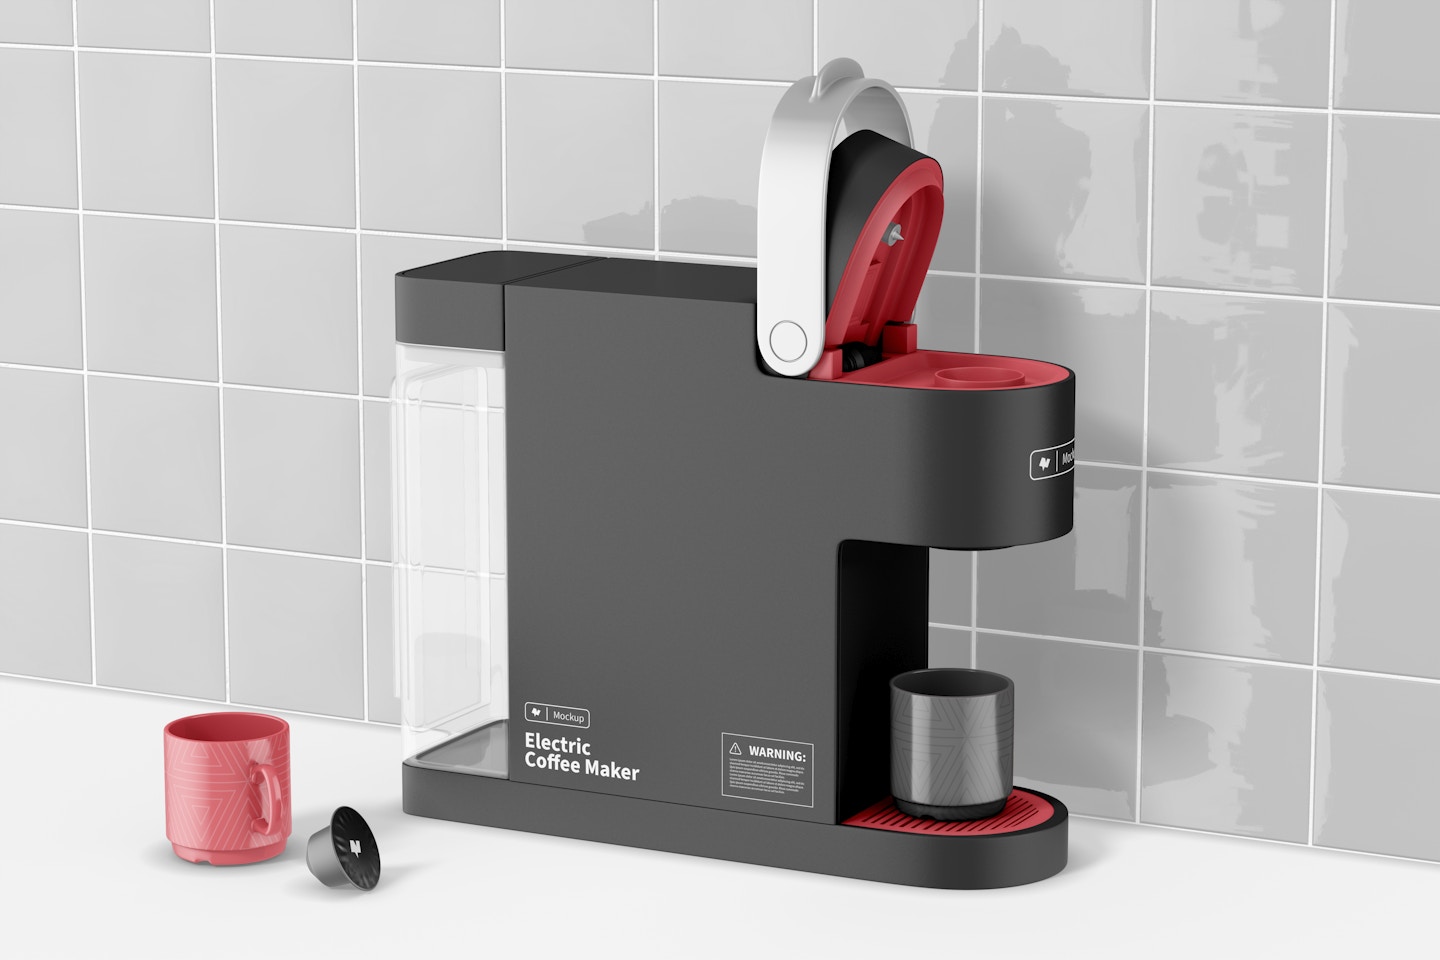 Electric Coffee Maker Mockup, Perspective